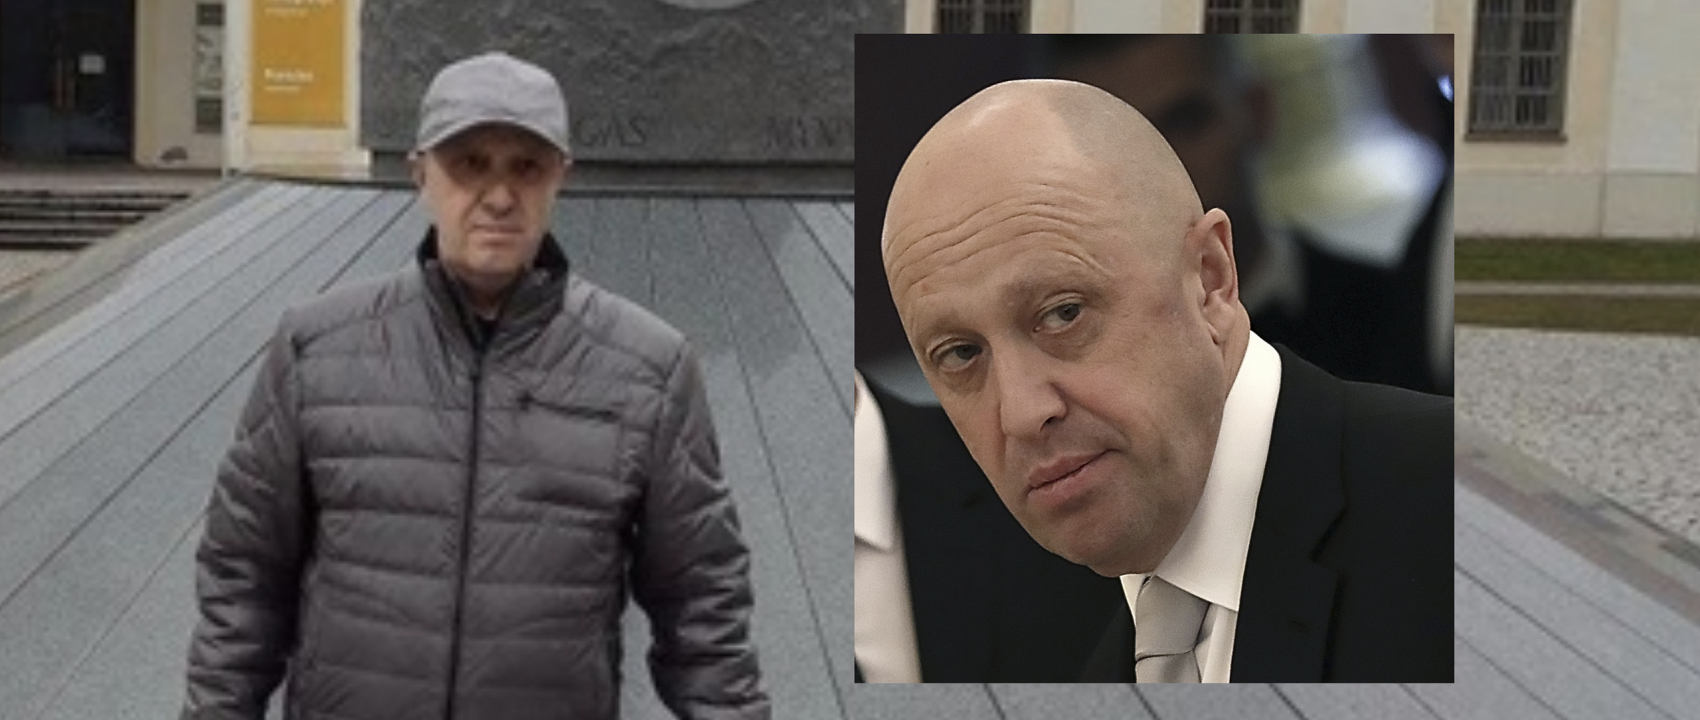 Left: Prigozhin impersonator photographed in front of the Lithuanian National Museum, one of several images of the impersonator distributed by Russian media. Right: file photo of Evgeny Prighozin at the Kremlin, July 4, 2017. (Sources: Delovaya Gazeta and REUTERS/Sergei Ilnitsky/Pool)